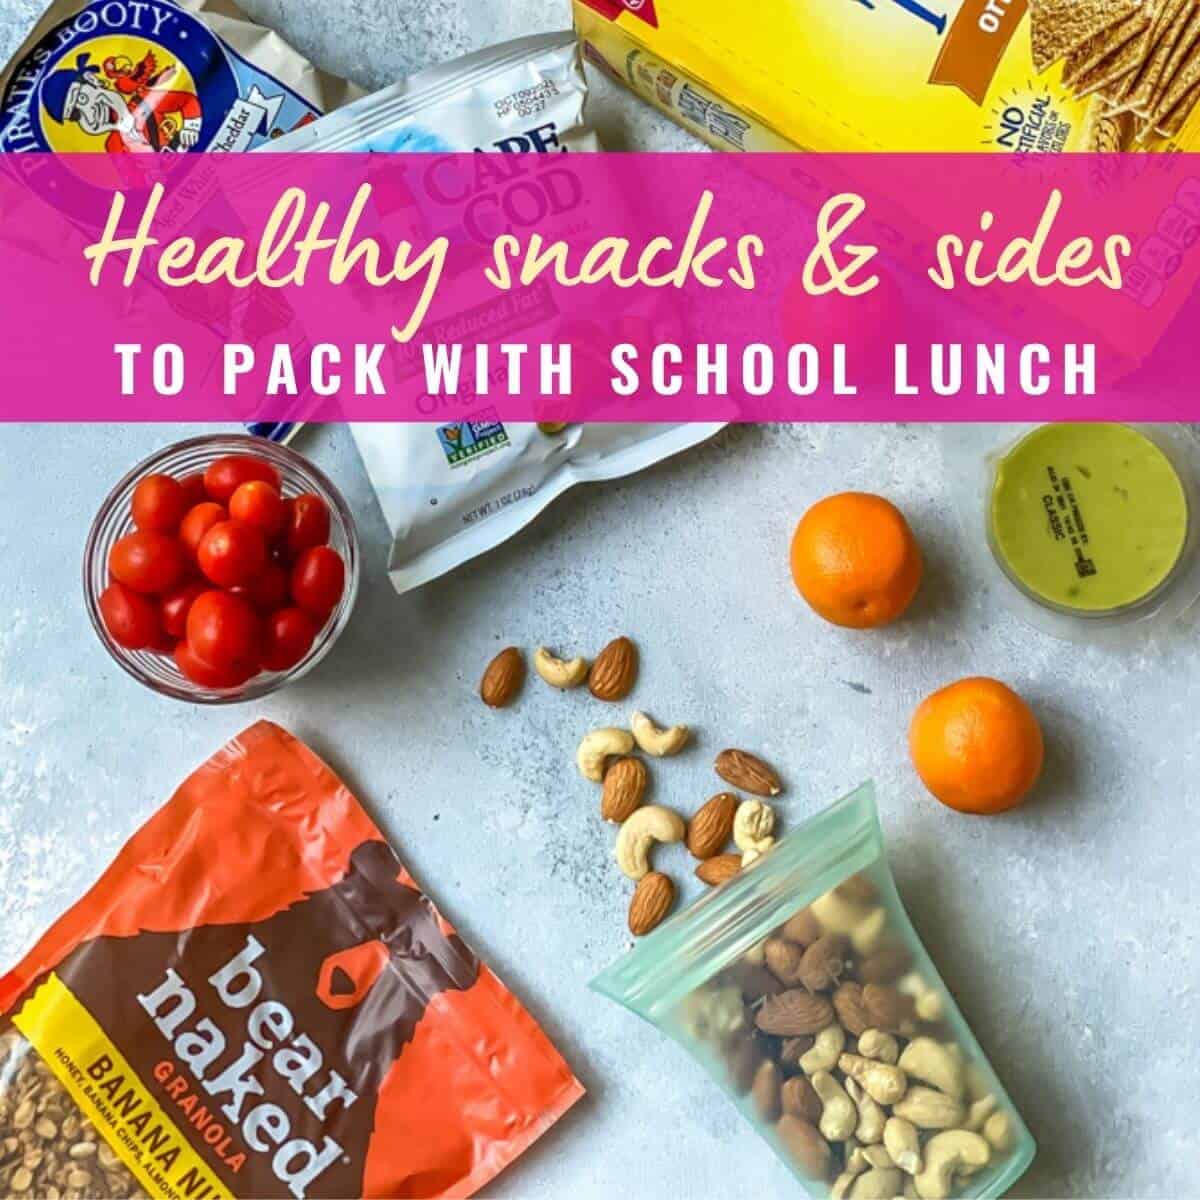 Healthy snacks and sides to pack with lunch